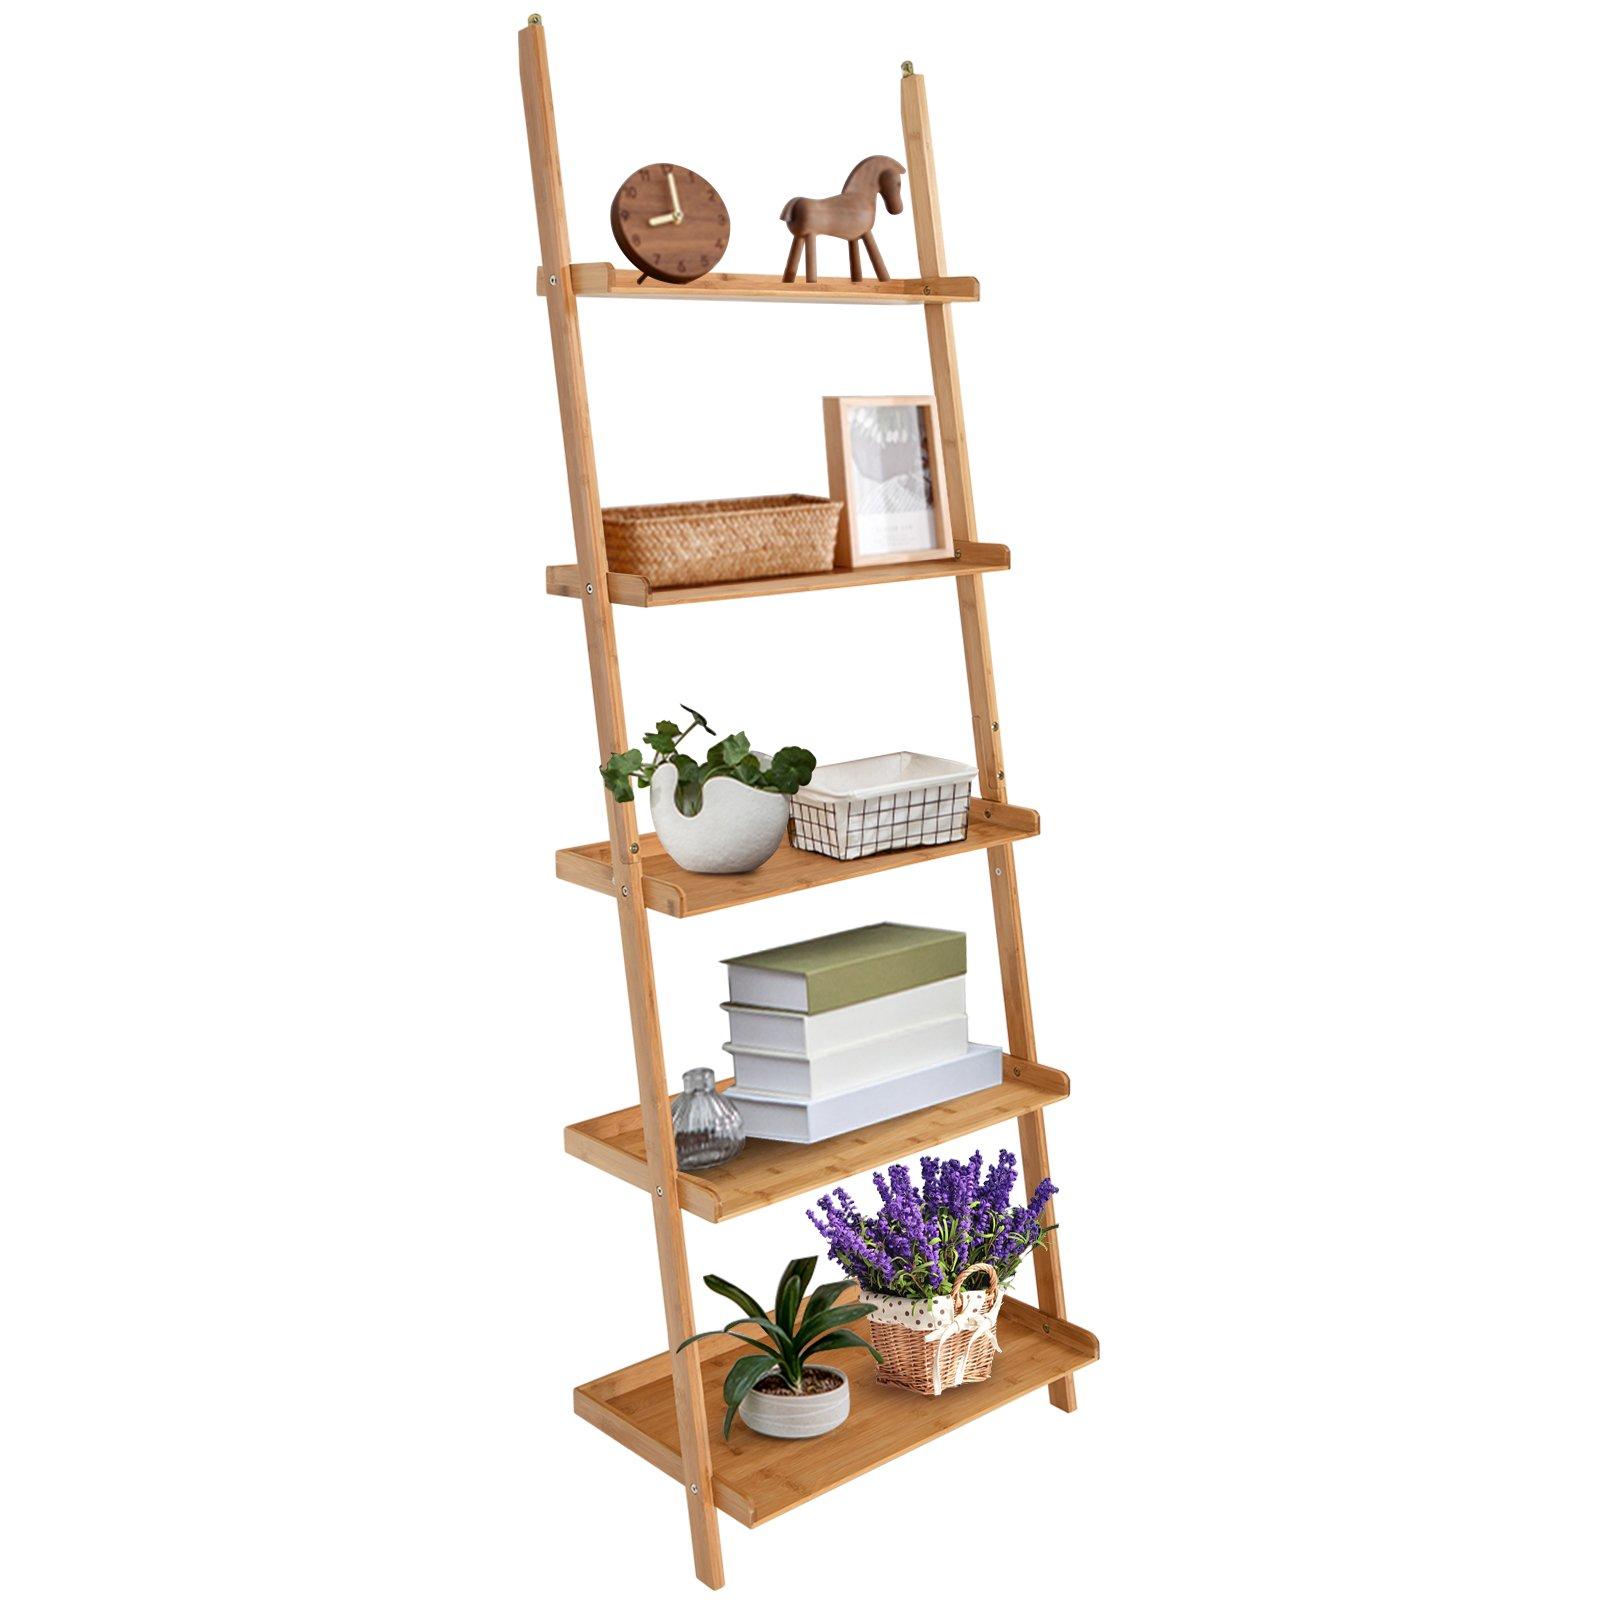 5 Tier Ladder Shelf Bamboo Leaning Wall Rack Bookcase Display Storage Shelves